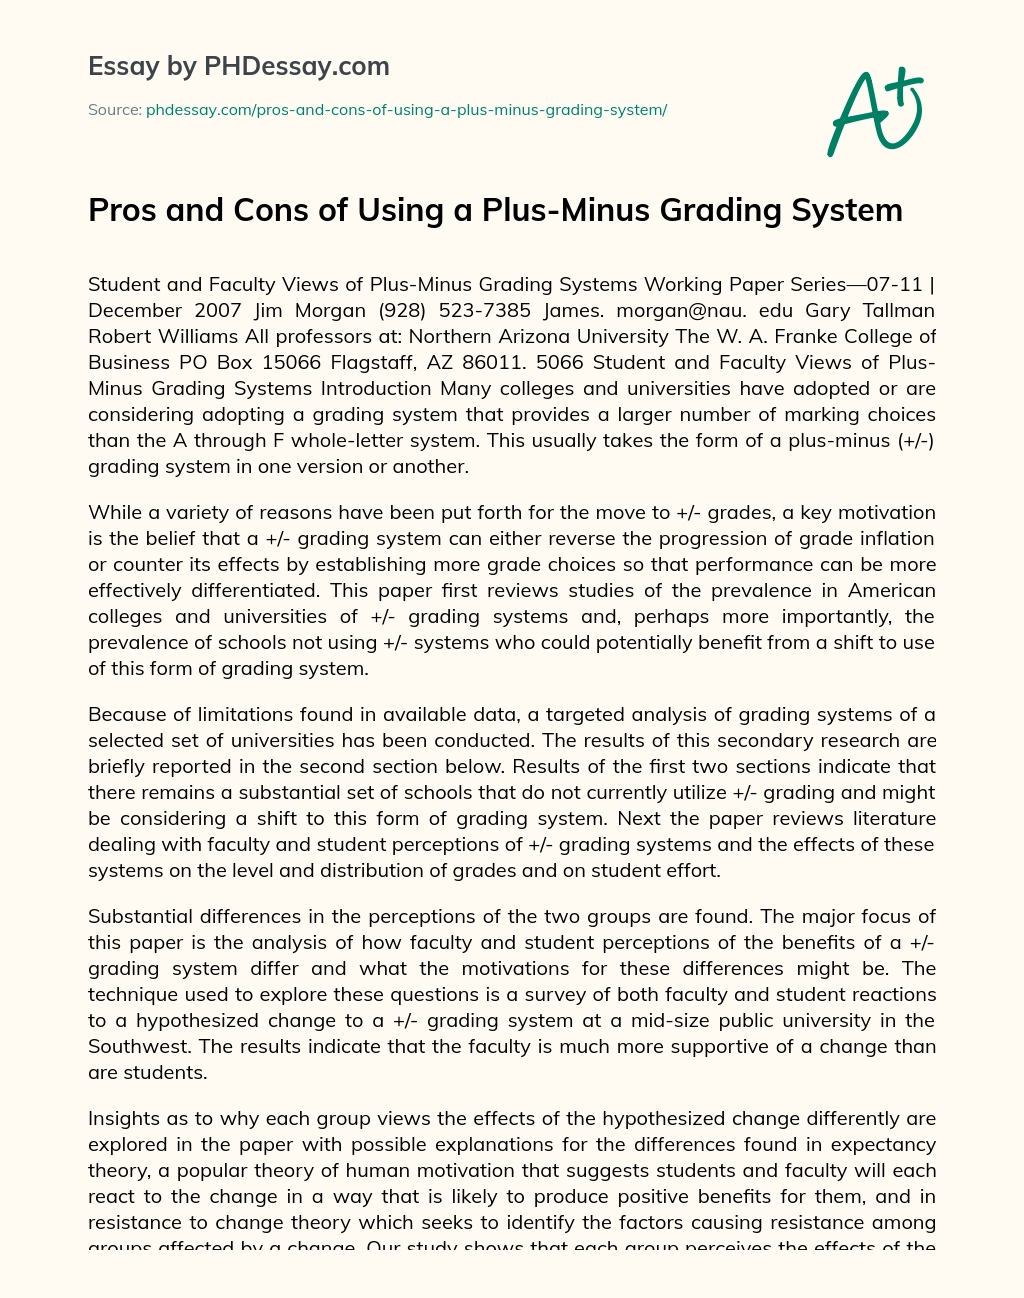 Pros and Cons of Using a Plus-Minus Grading System essay